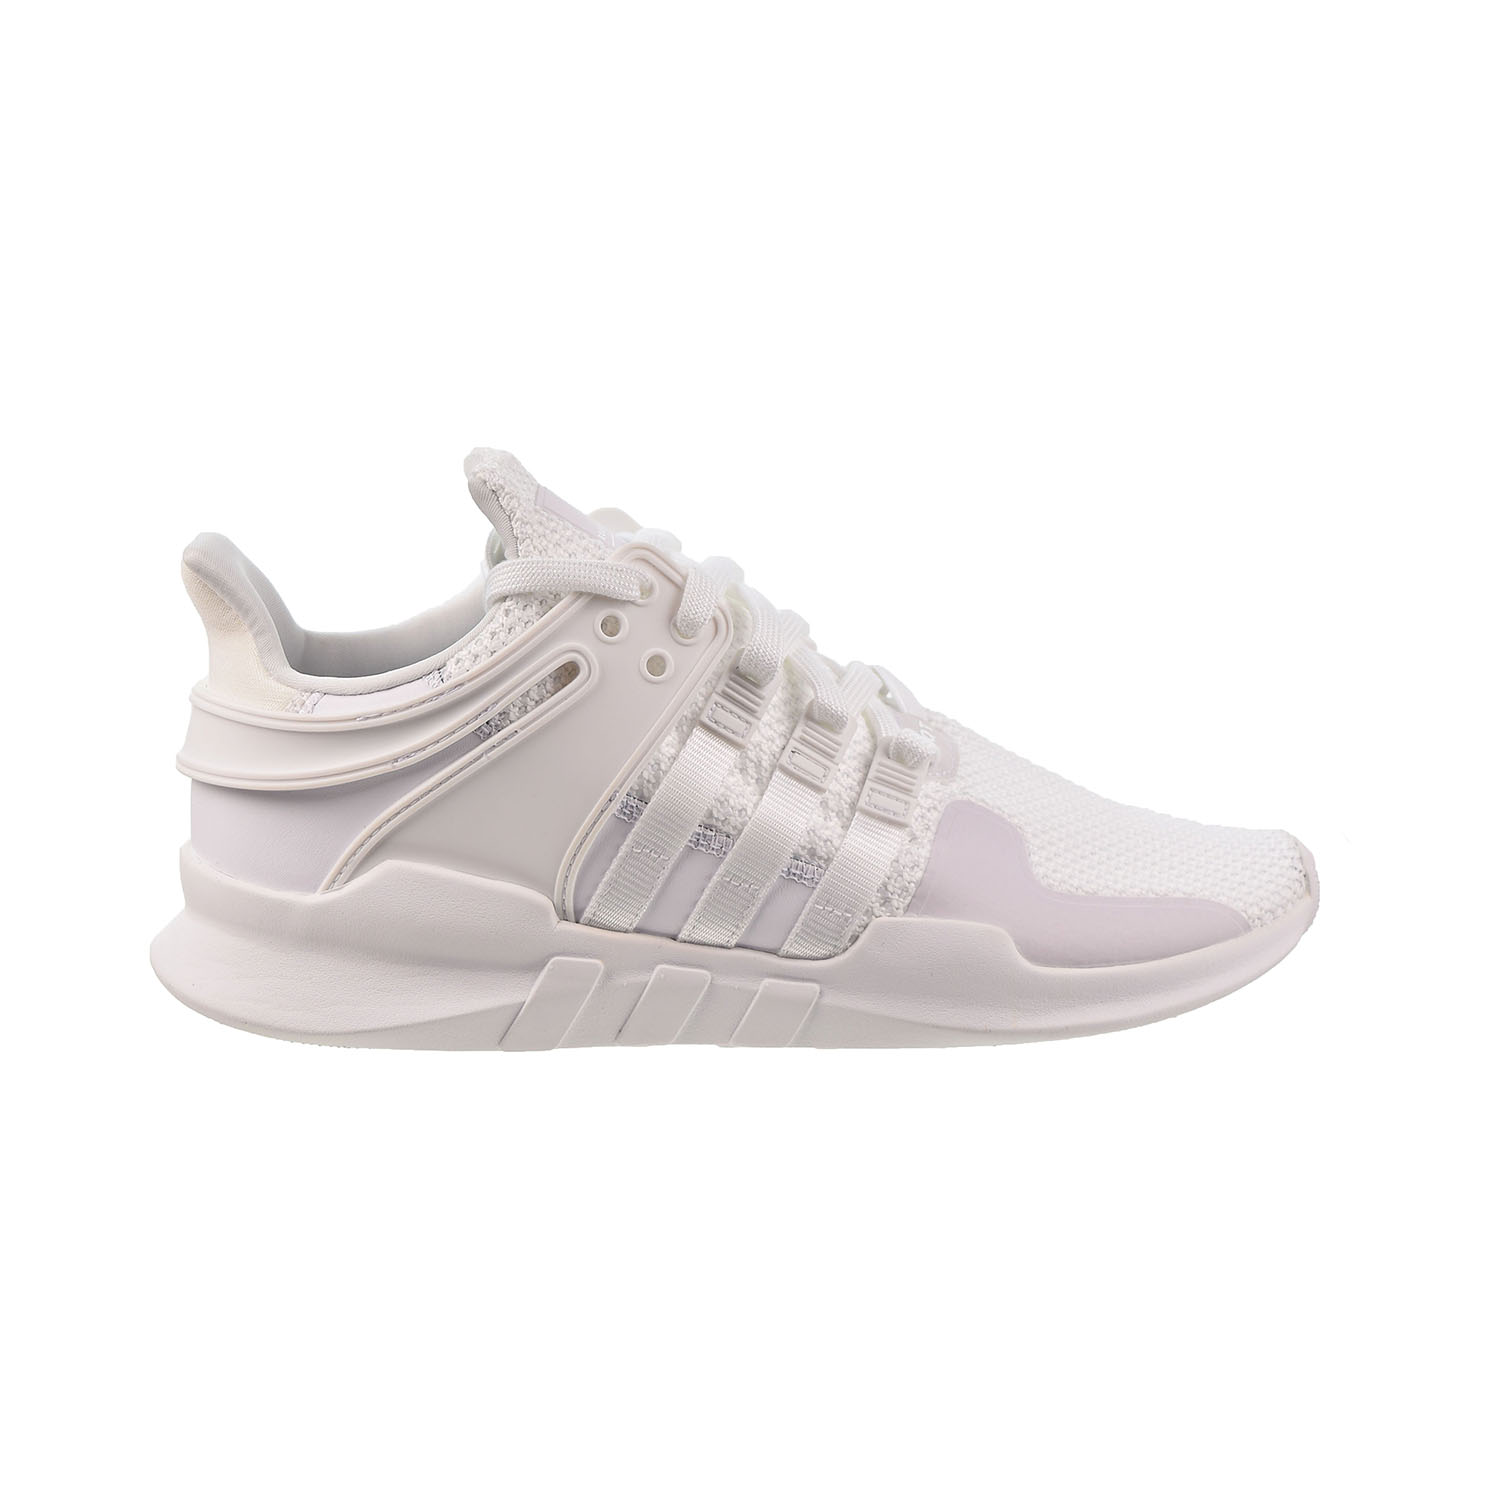 adidas eqt support adv athletic shoe